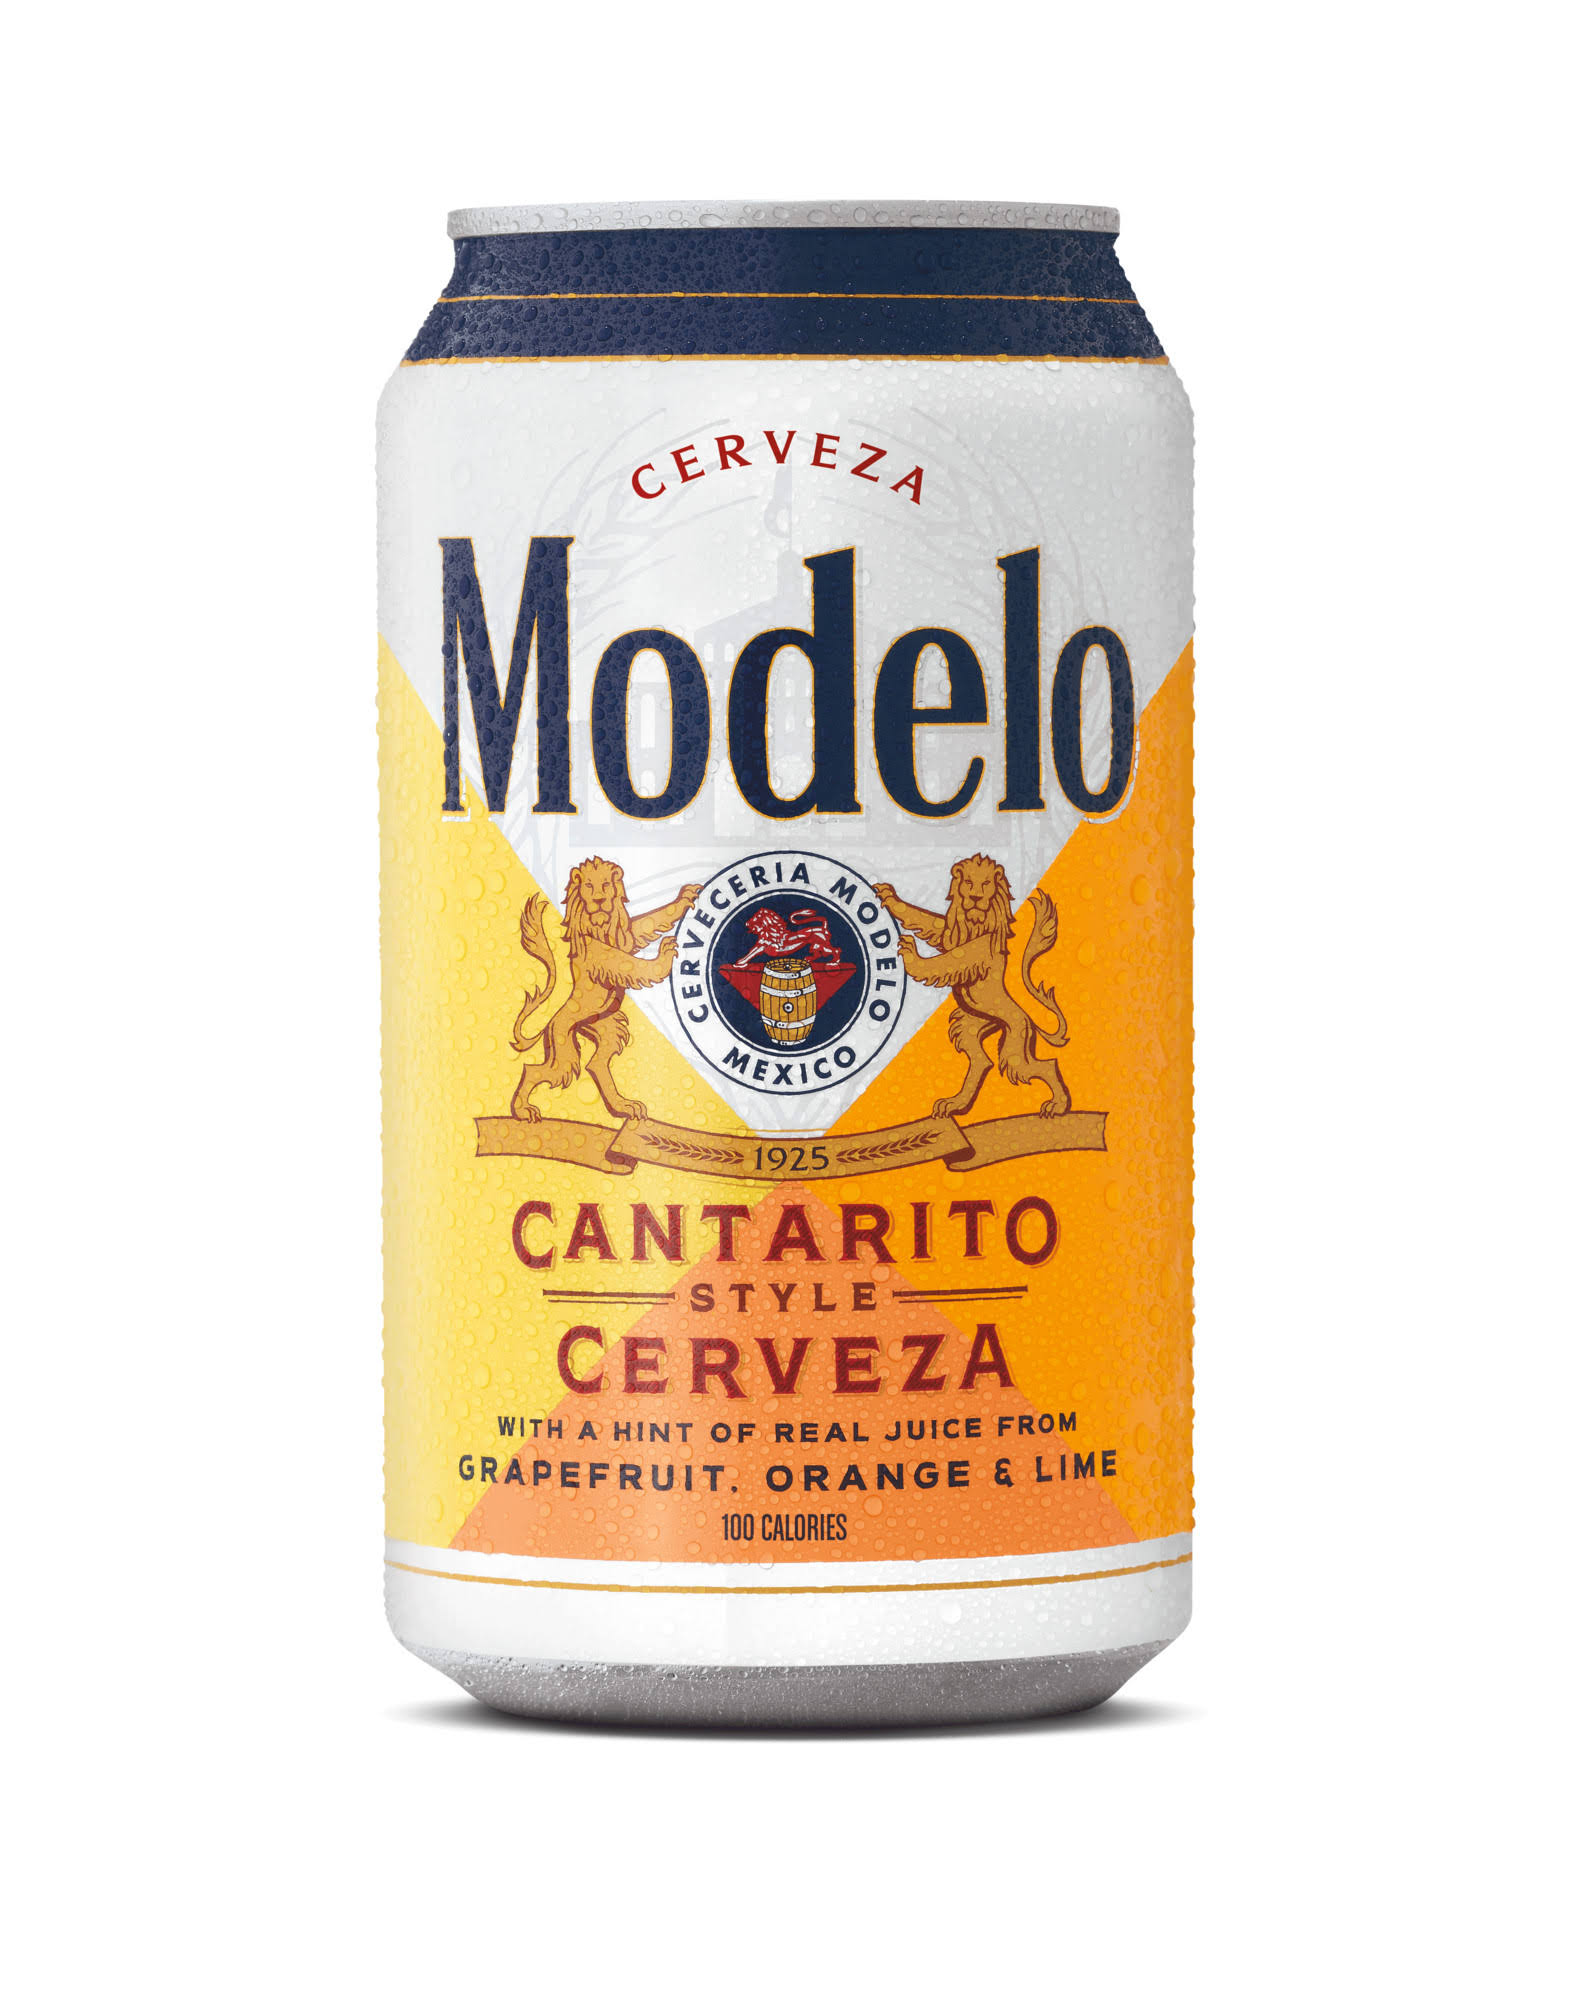 Modelo Cantarito Style Cerveza Mexican Lager Import Beer, 12 fl oz Can, 4.0% ABV